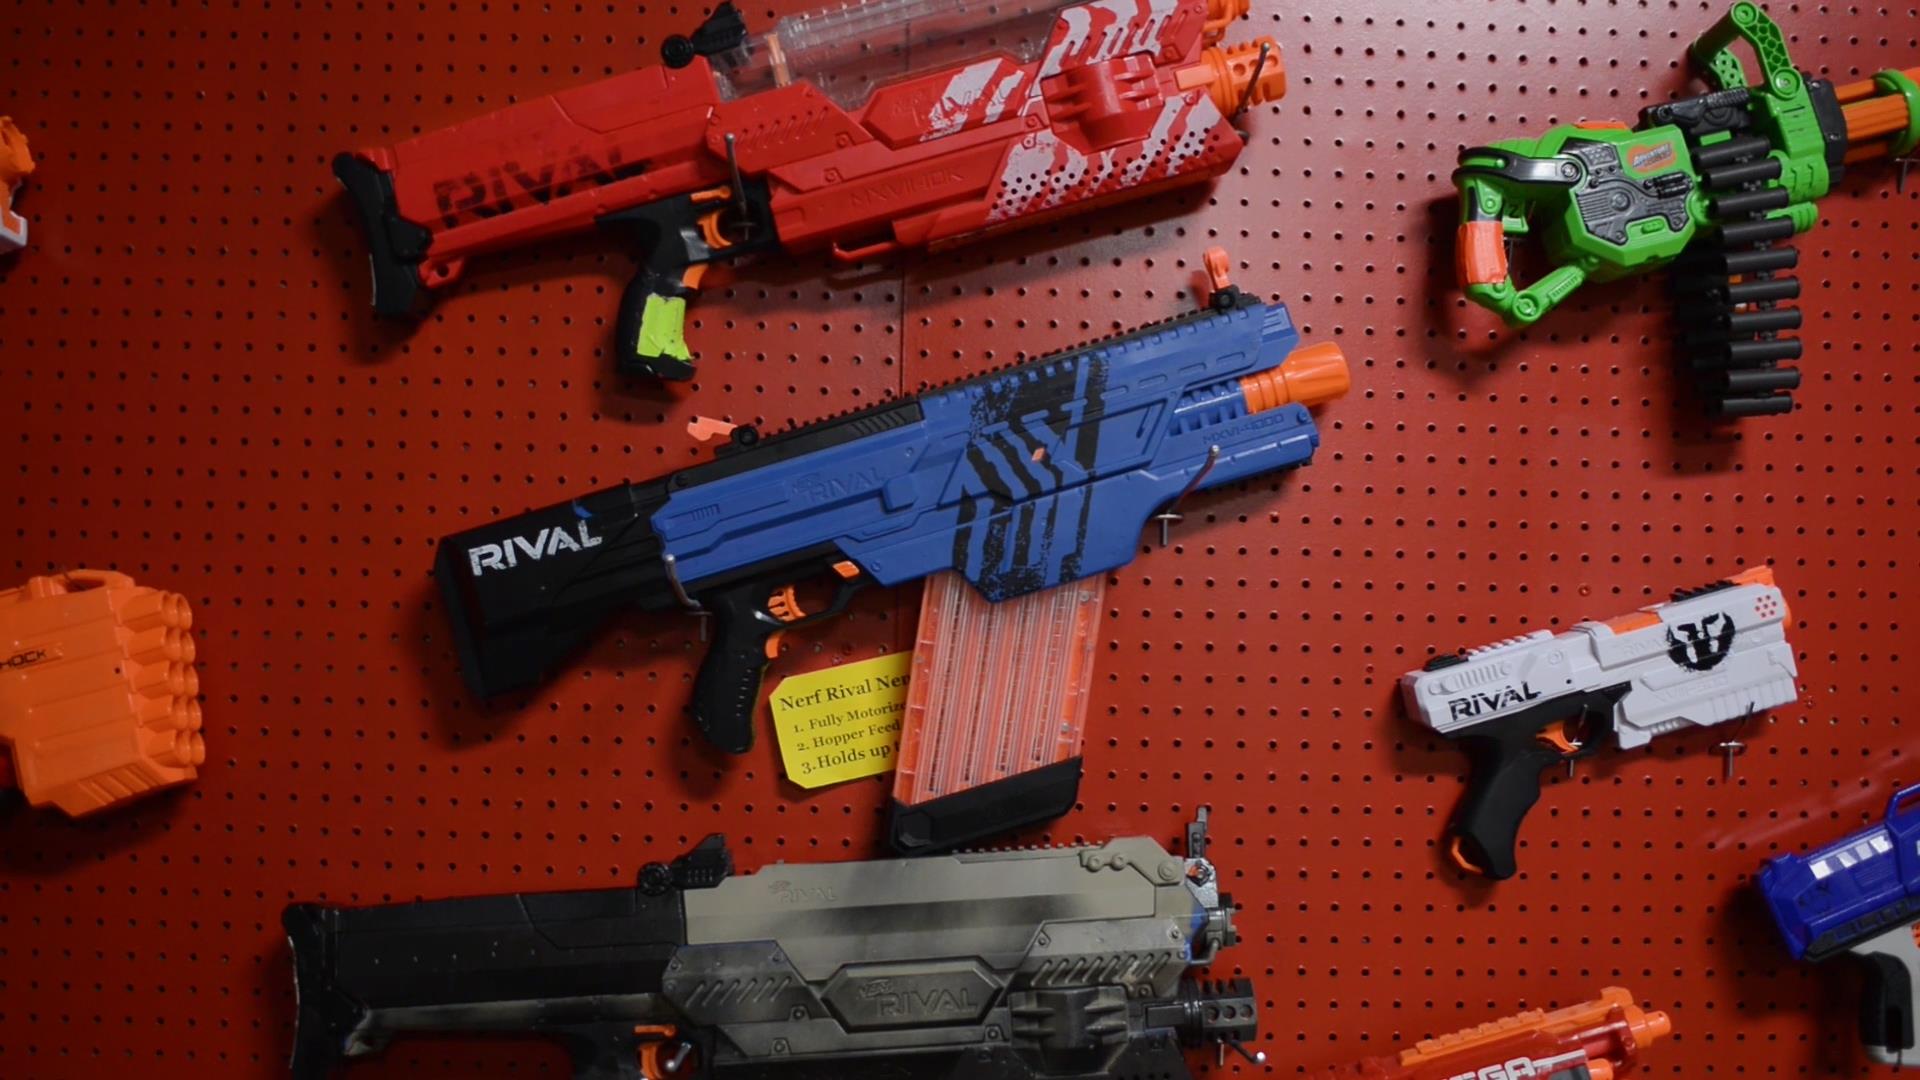 Should kids play with toy guns? 